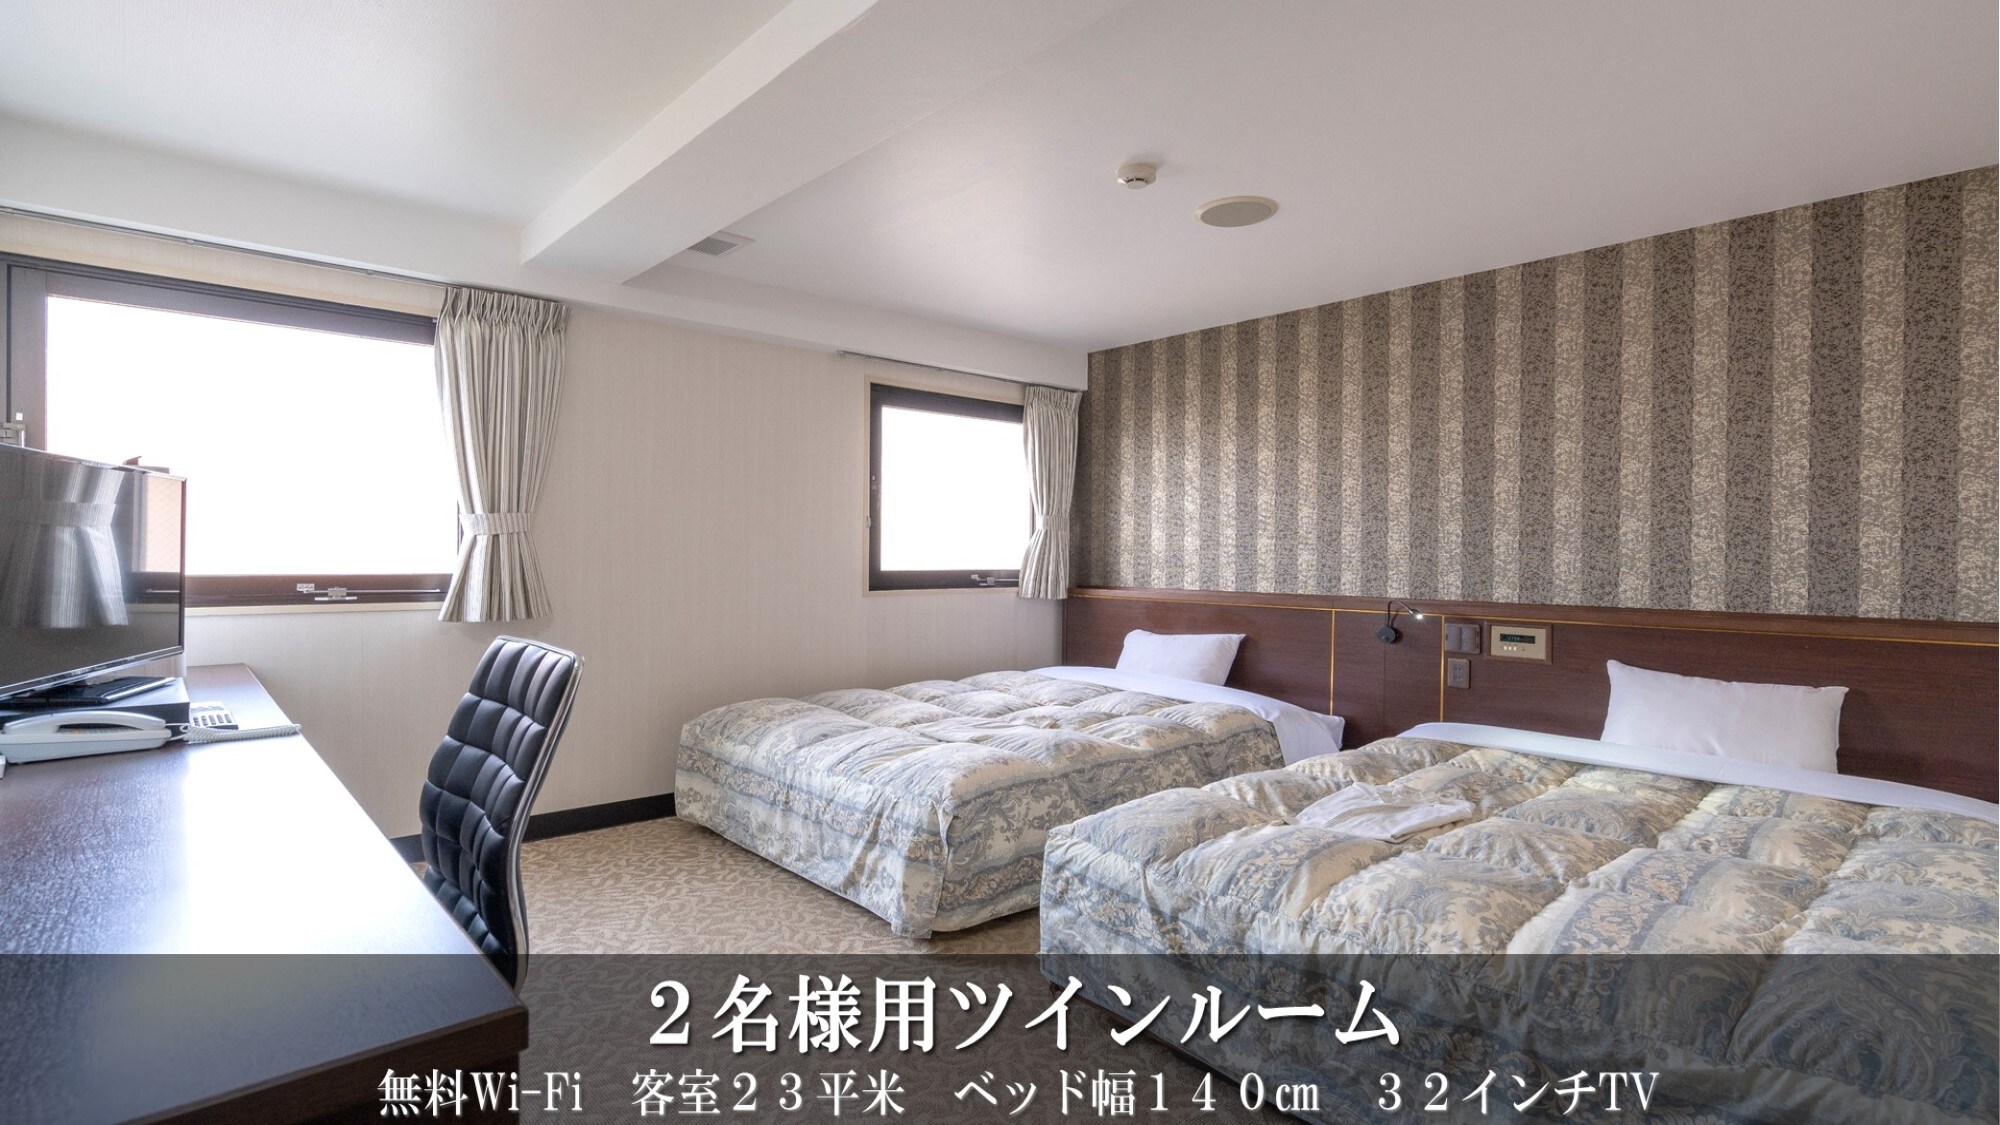 Twin room (23 square meters for 2 people, 2 beds with a width of 140 cm, 32 inch TV, non-smoking)